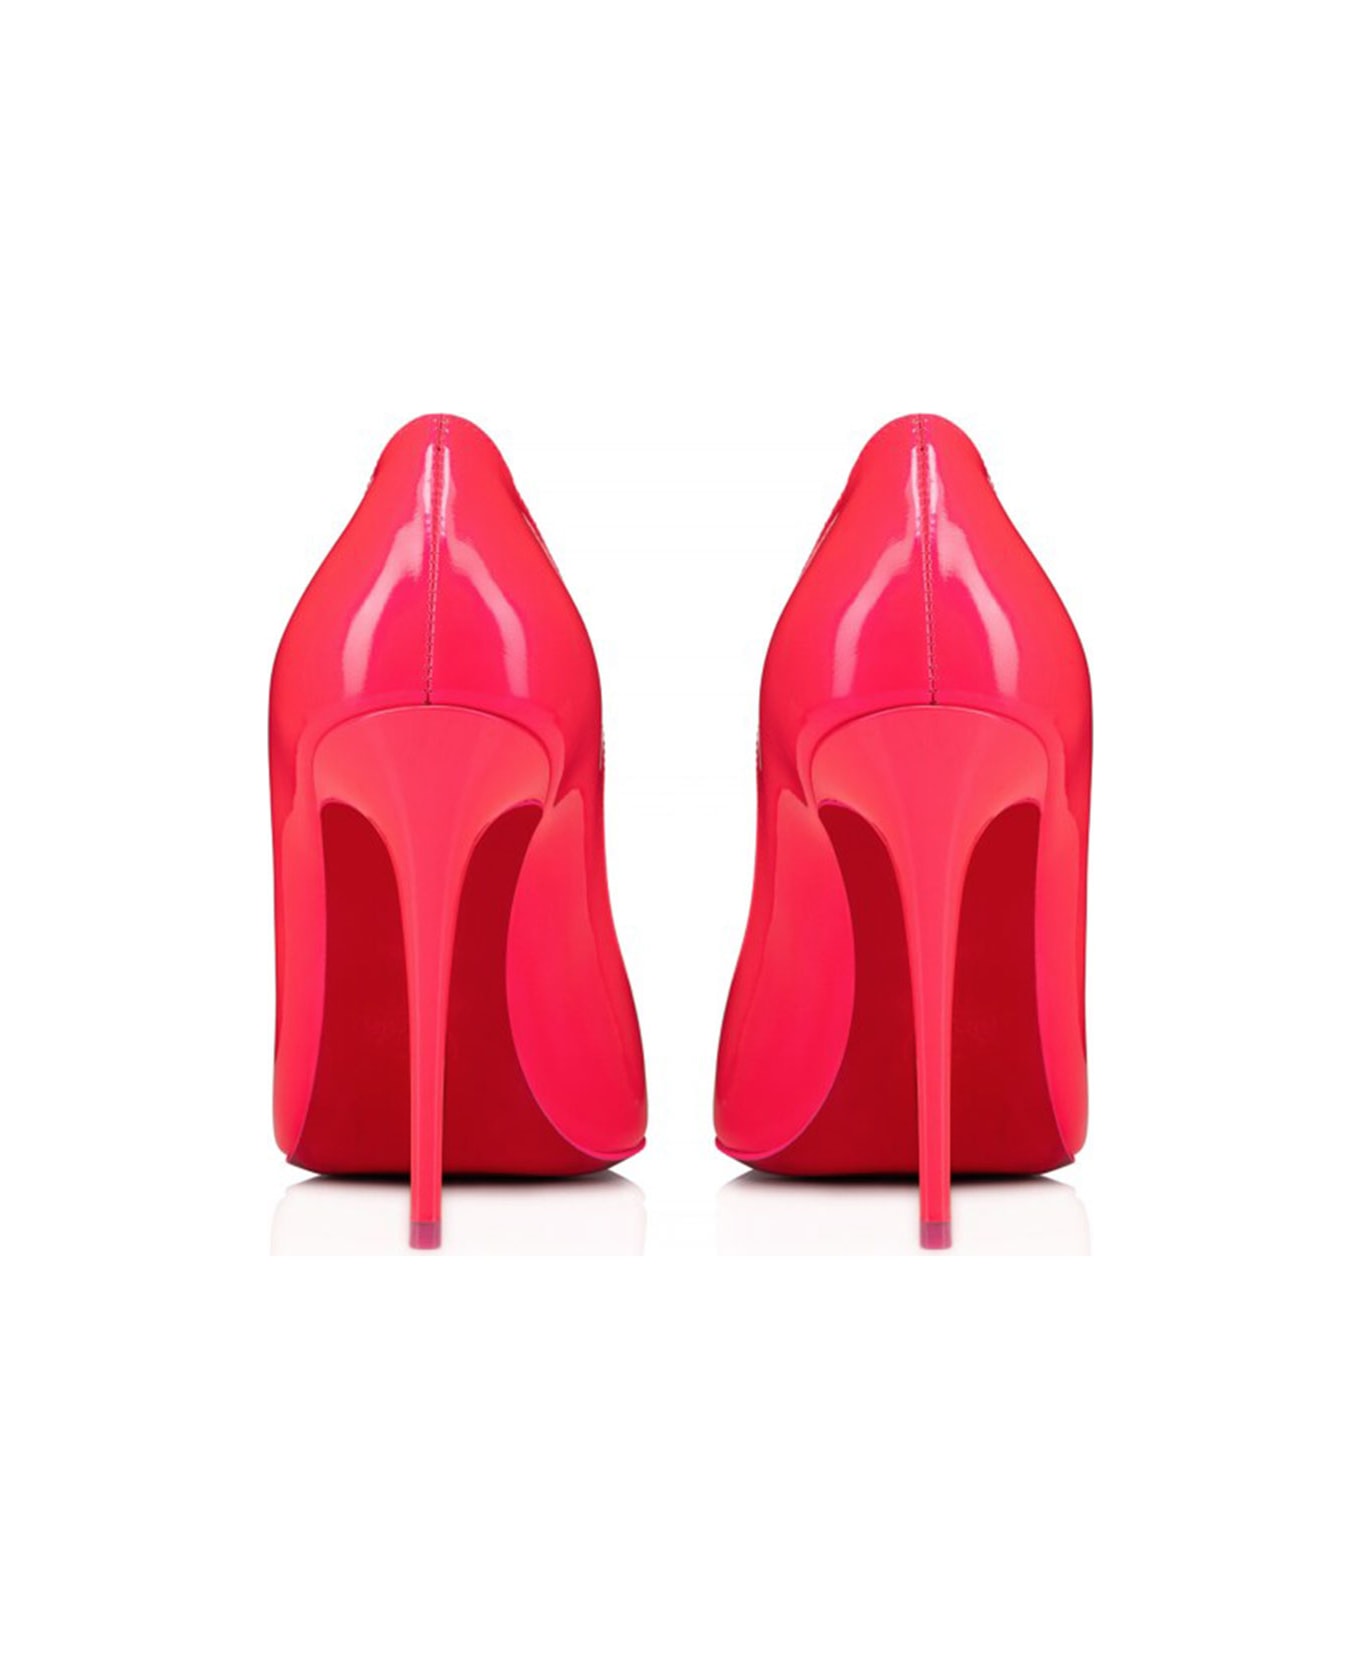 Christian Louboutin Kate Pumps In Patent Leather - Pink & Purple